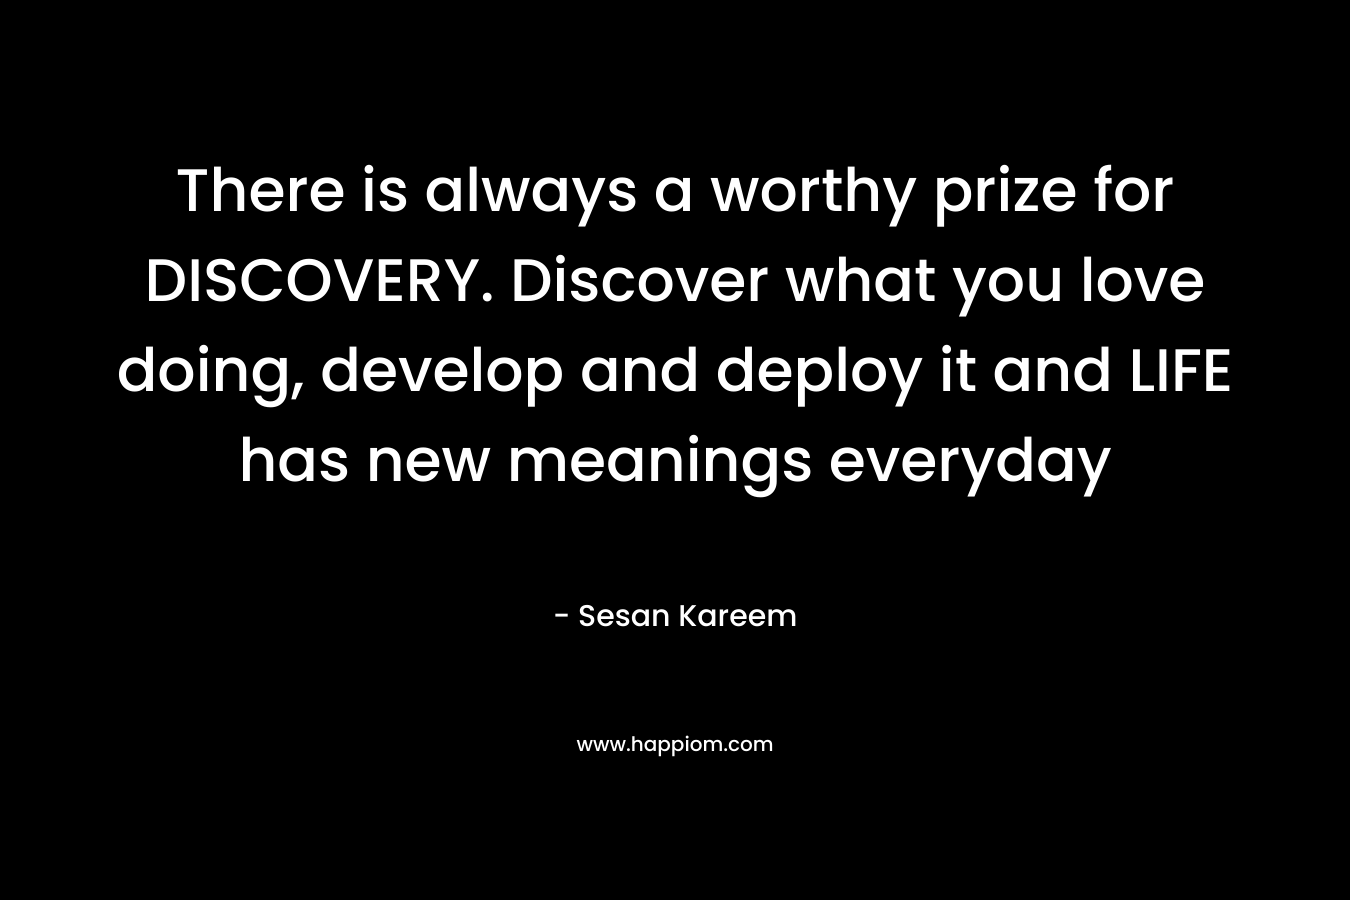 There is always a worthy prize for DISCOVERY. Discover what you love doing, develop and deploy it and LIFE has new meanings everyday